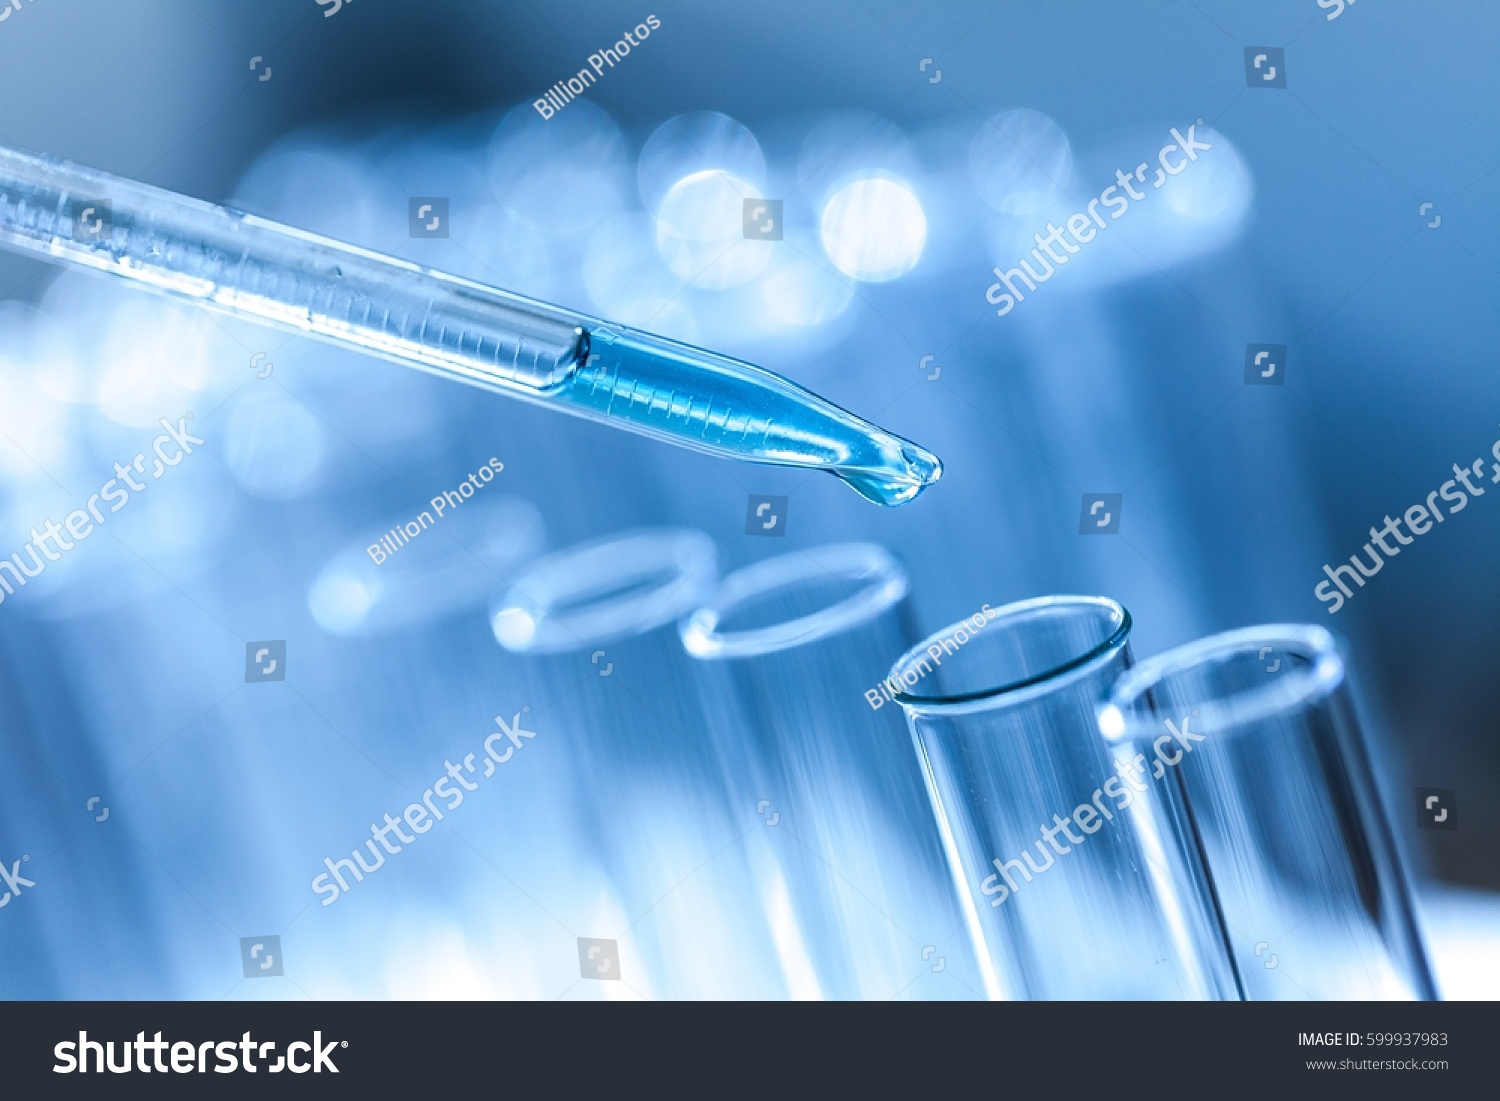 Pipette and test tubes. #599937983